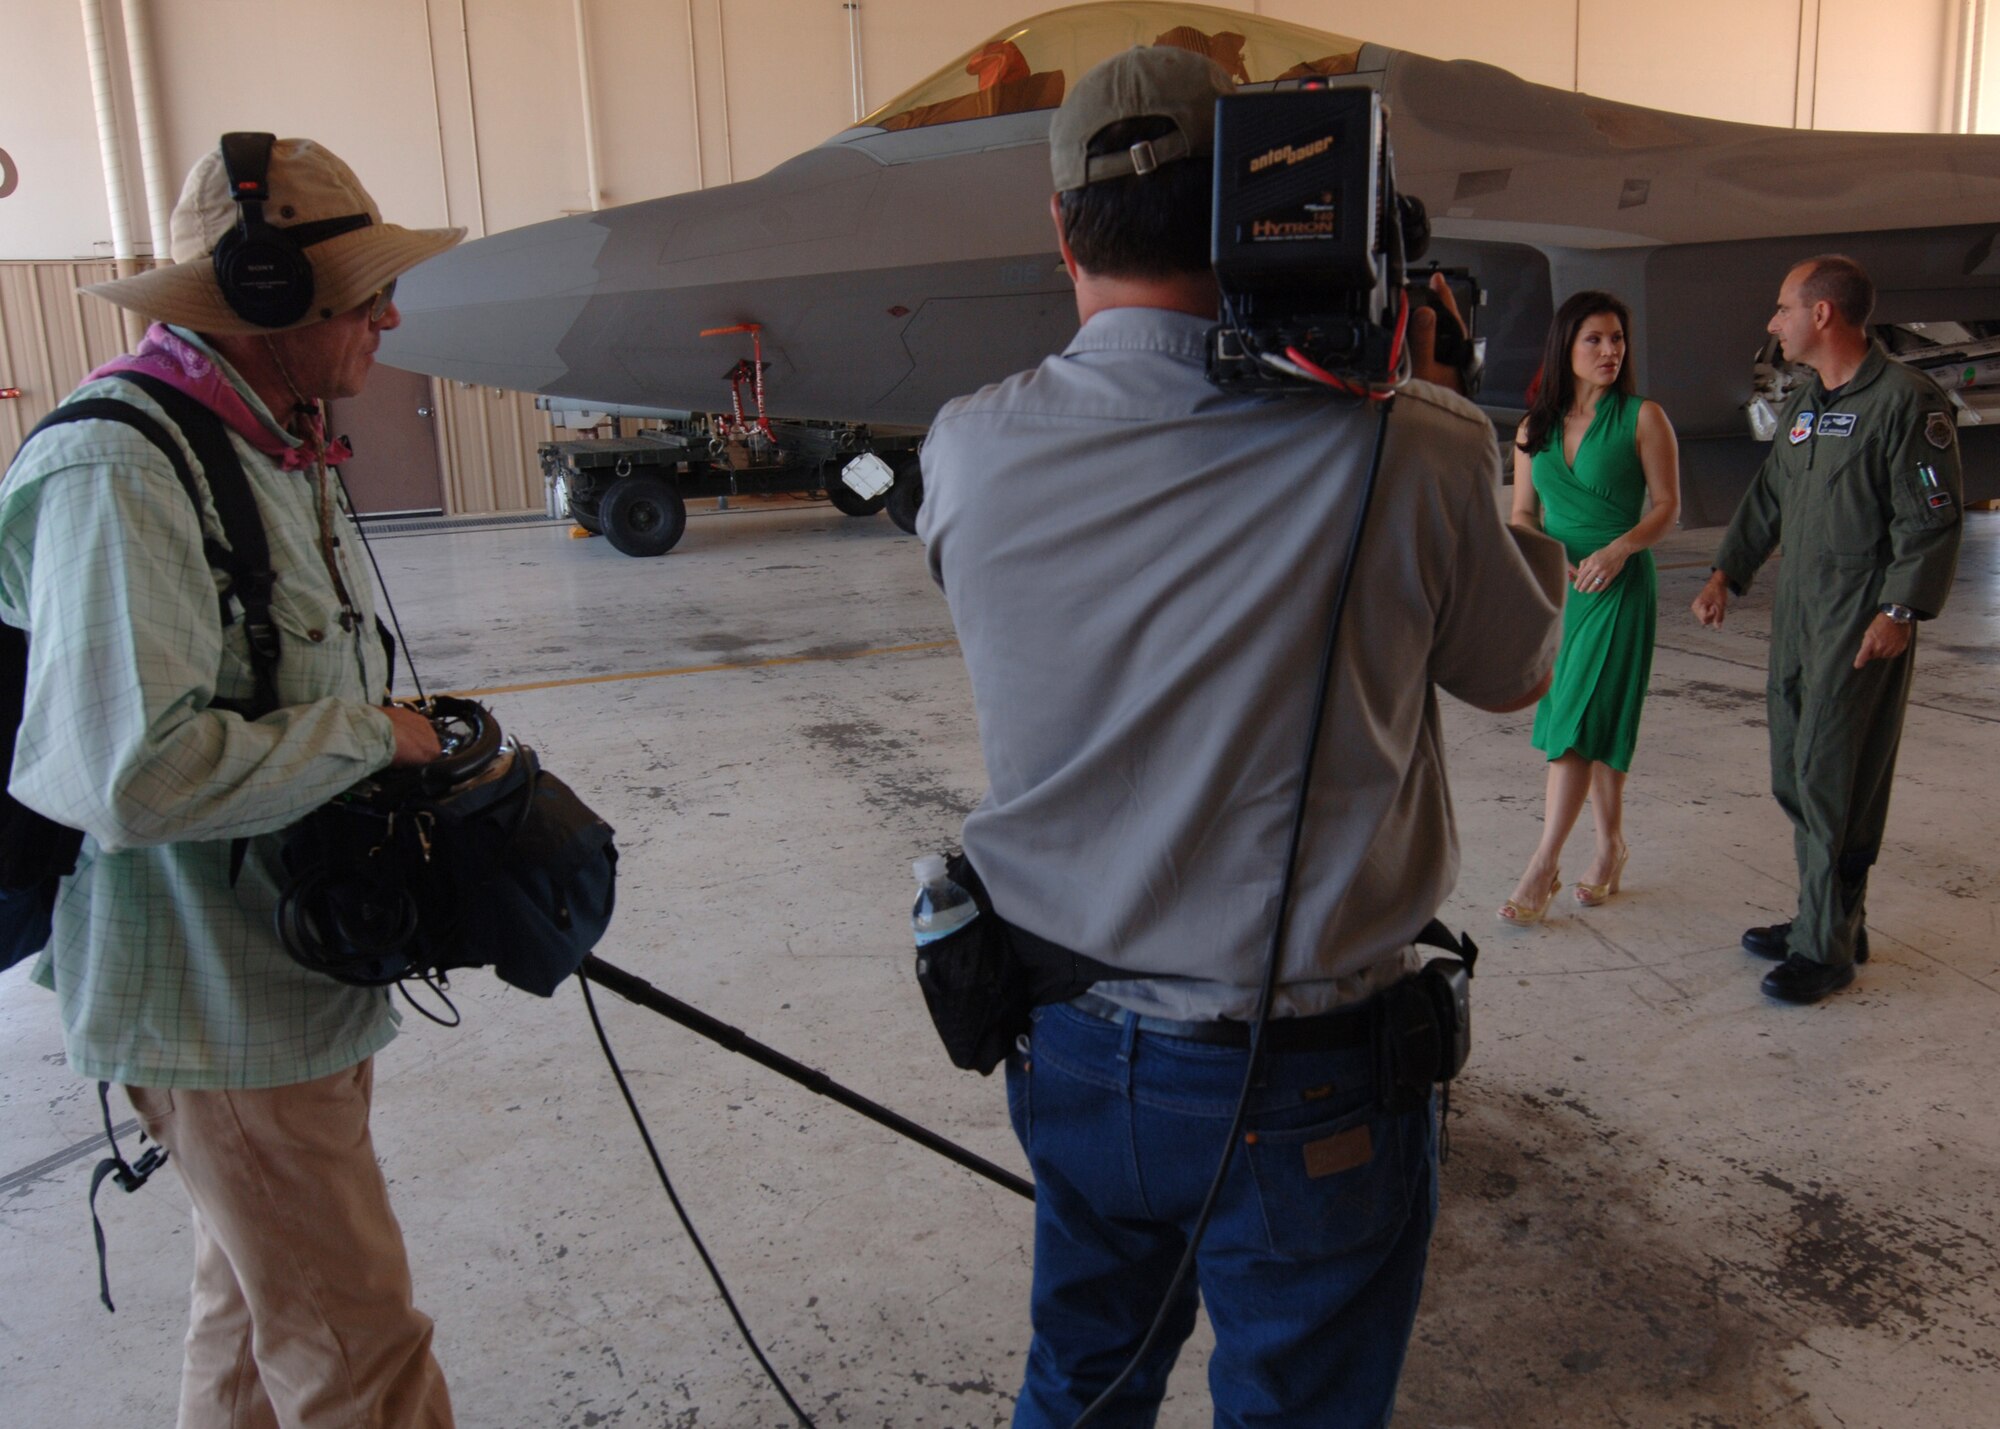 "The Insider"'s Victoria Recano does a walk around of the F-22A with Col. Jeff Harrigian, 49th Fighter Wing commander, September 19 at Holloman Air Force Base, N.M. "The Insider" was given access to director Michael Bay's "Transformers: Revenge of the Fallen" while filming at Holloman and White Sands Missile Range.  (U.S. Air Force photo/Airman 1st Class Michael Means)